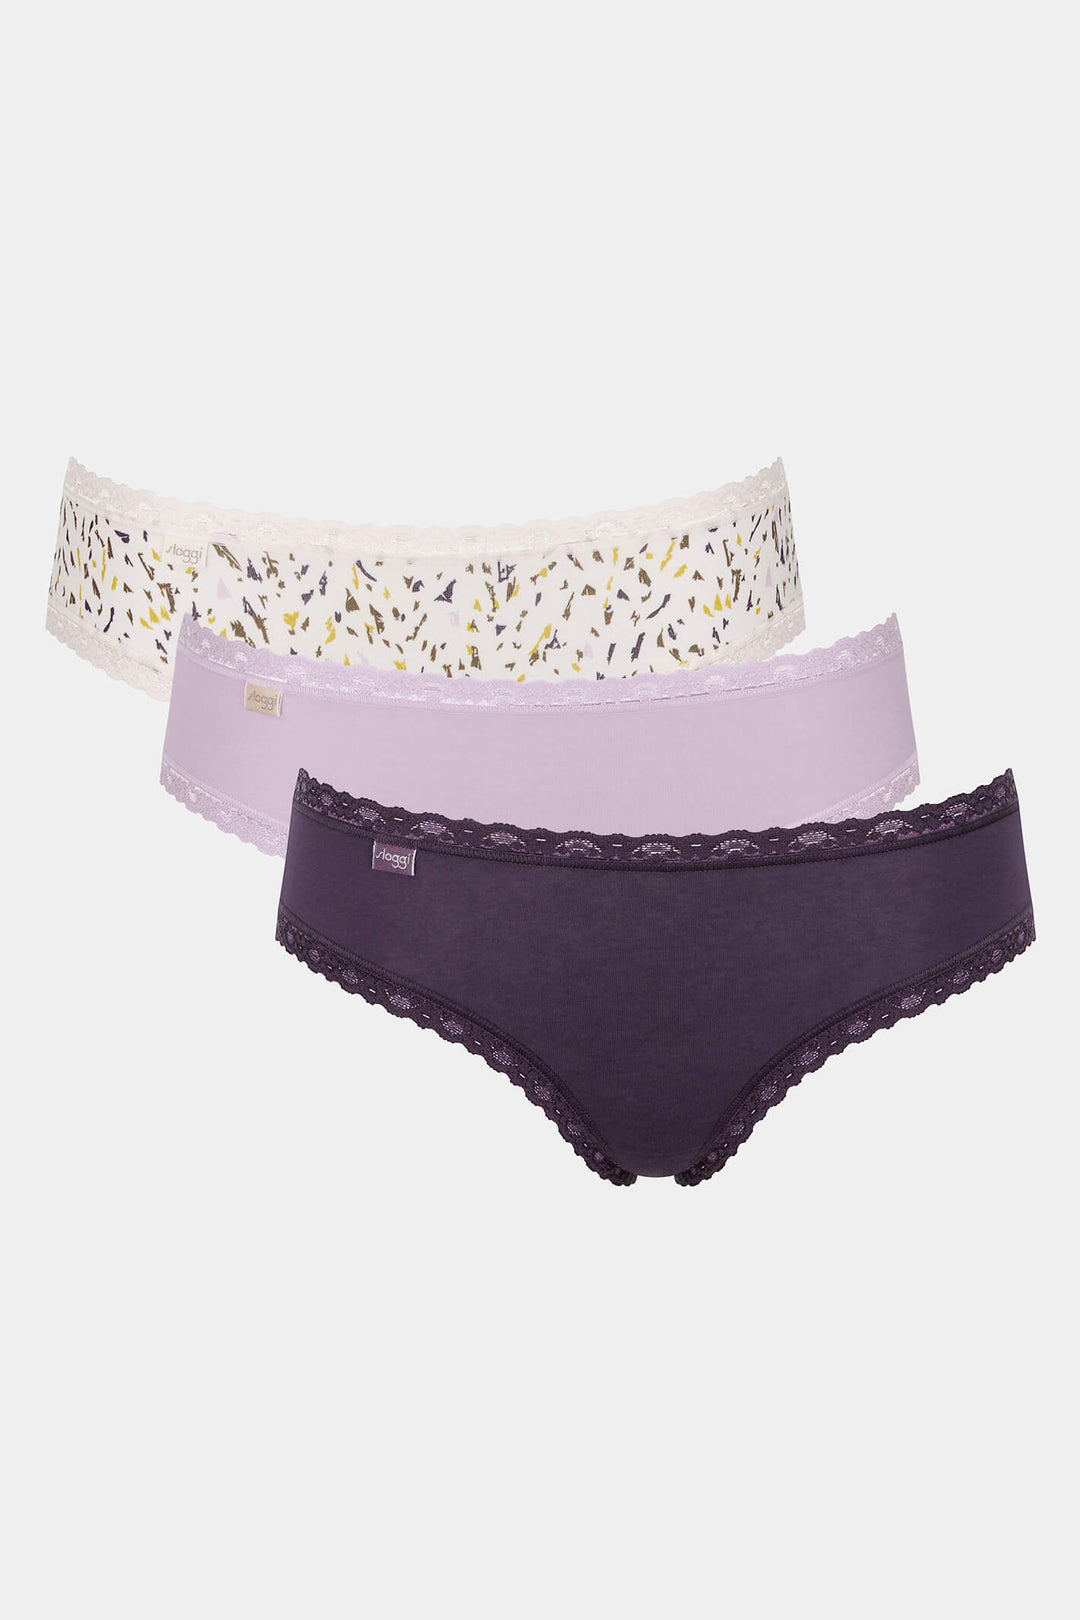 Sloggi 10198269 VOO6 Mauve Multi Colour 247 Weekend Hipster Brief 3 Pack - Shirley Allum Boutique